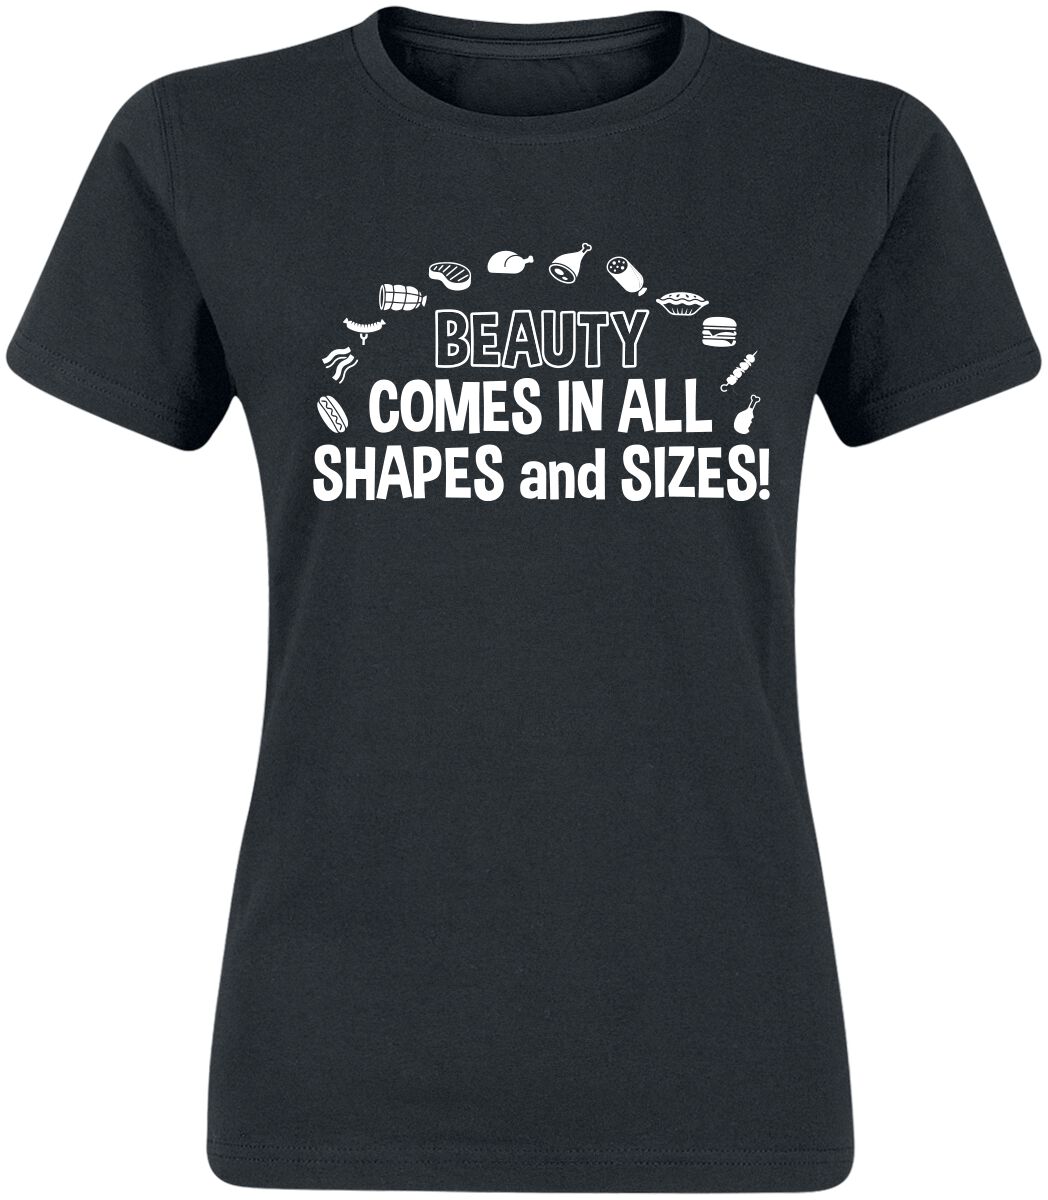 Slogans Beauty Comes In All Shapes And Sizes! T-Shirt black